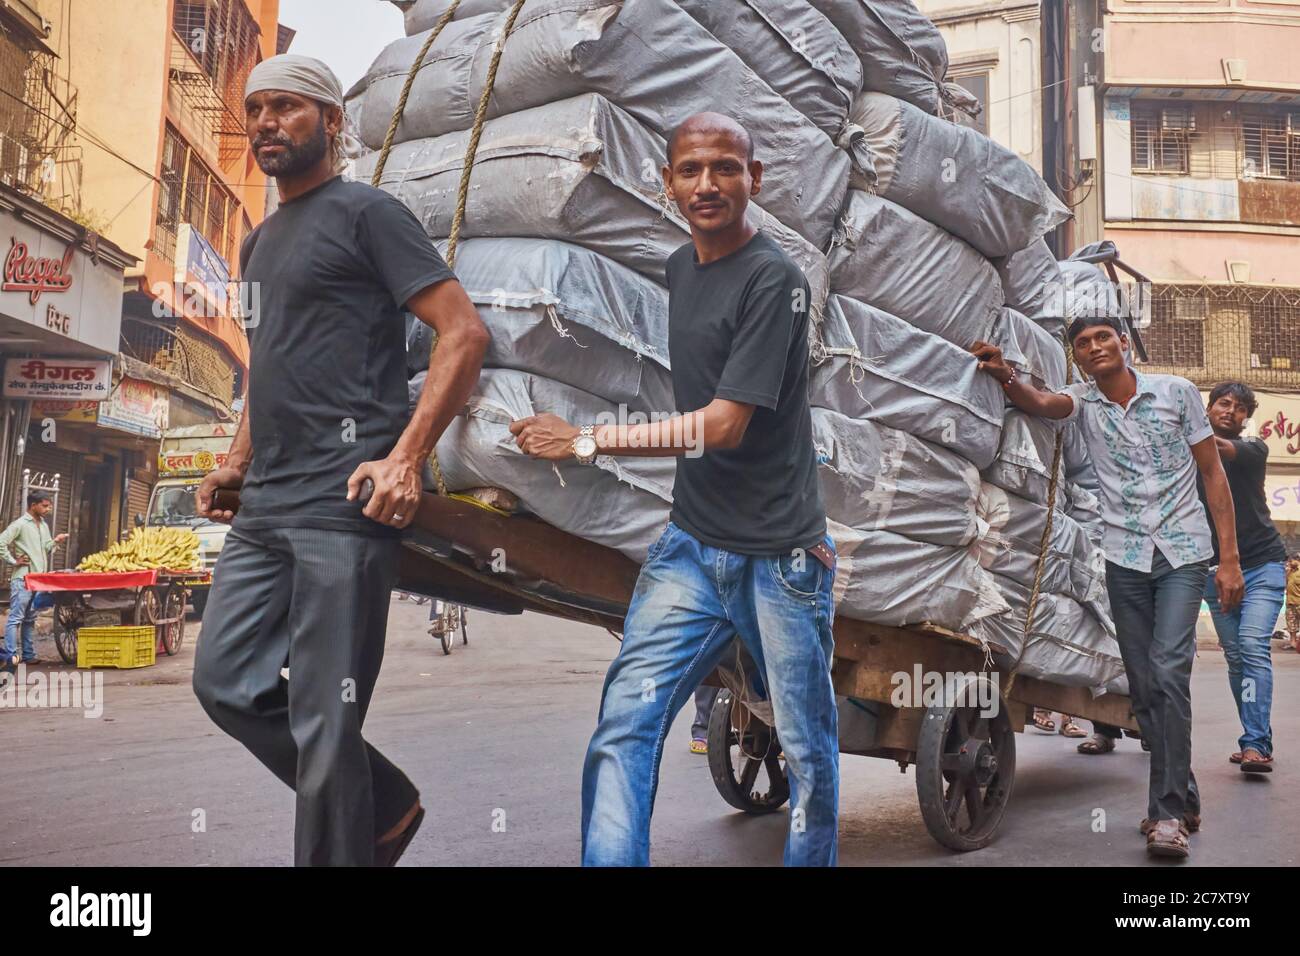 A handcart heaped full of bales of cloth transported by four men along Kalbadevi Road, a textile trading area in Bhuleshwar area Mumbai, India Stock Photo